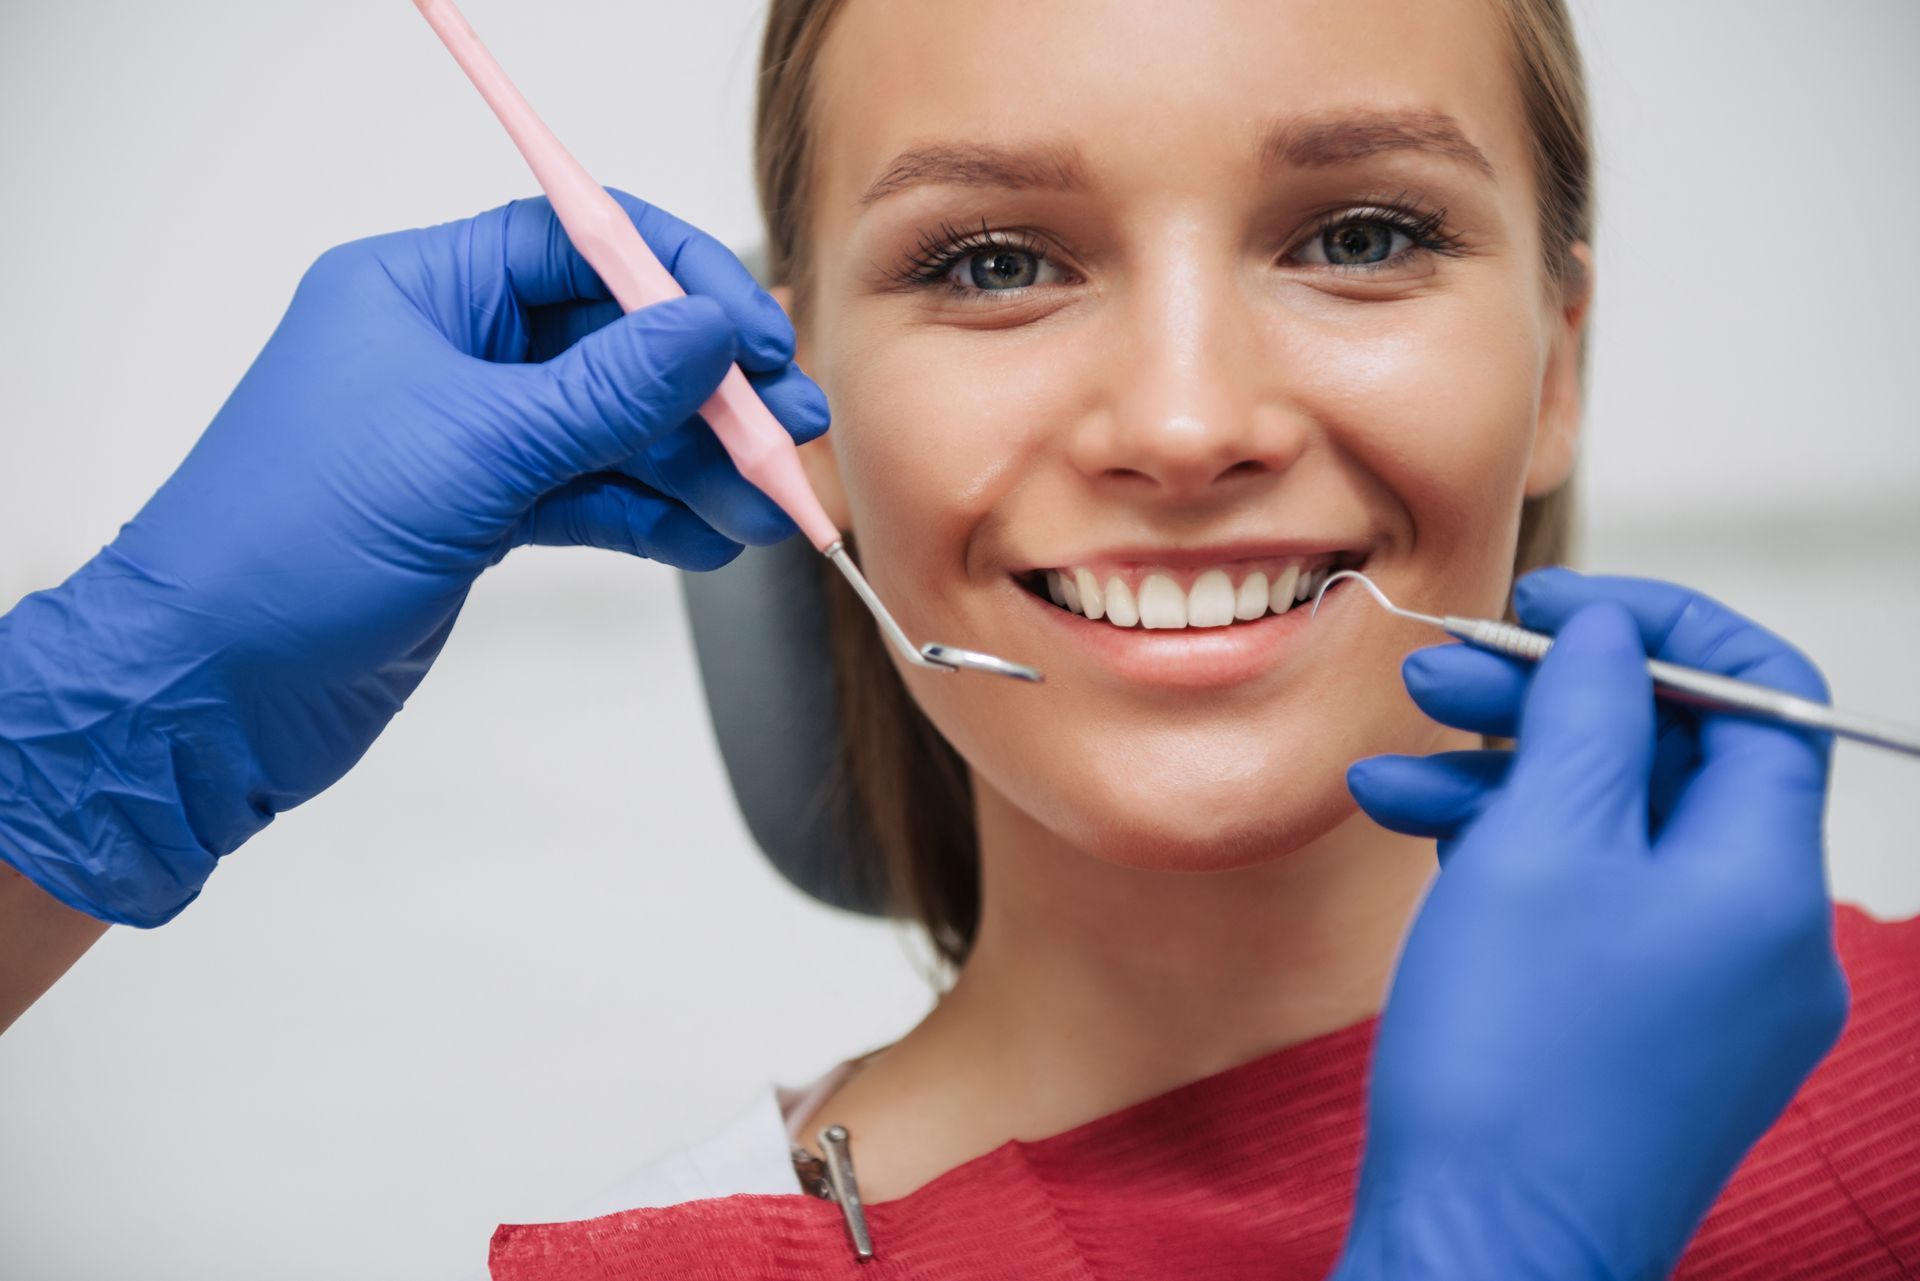 Personalized dental treatment